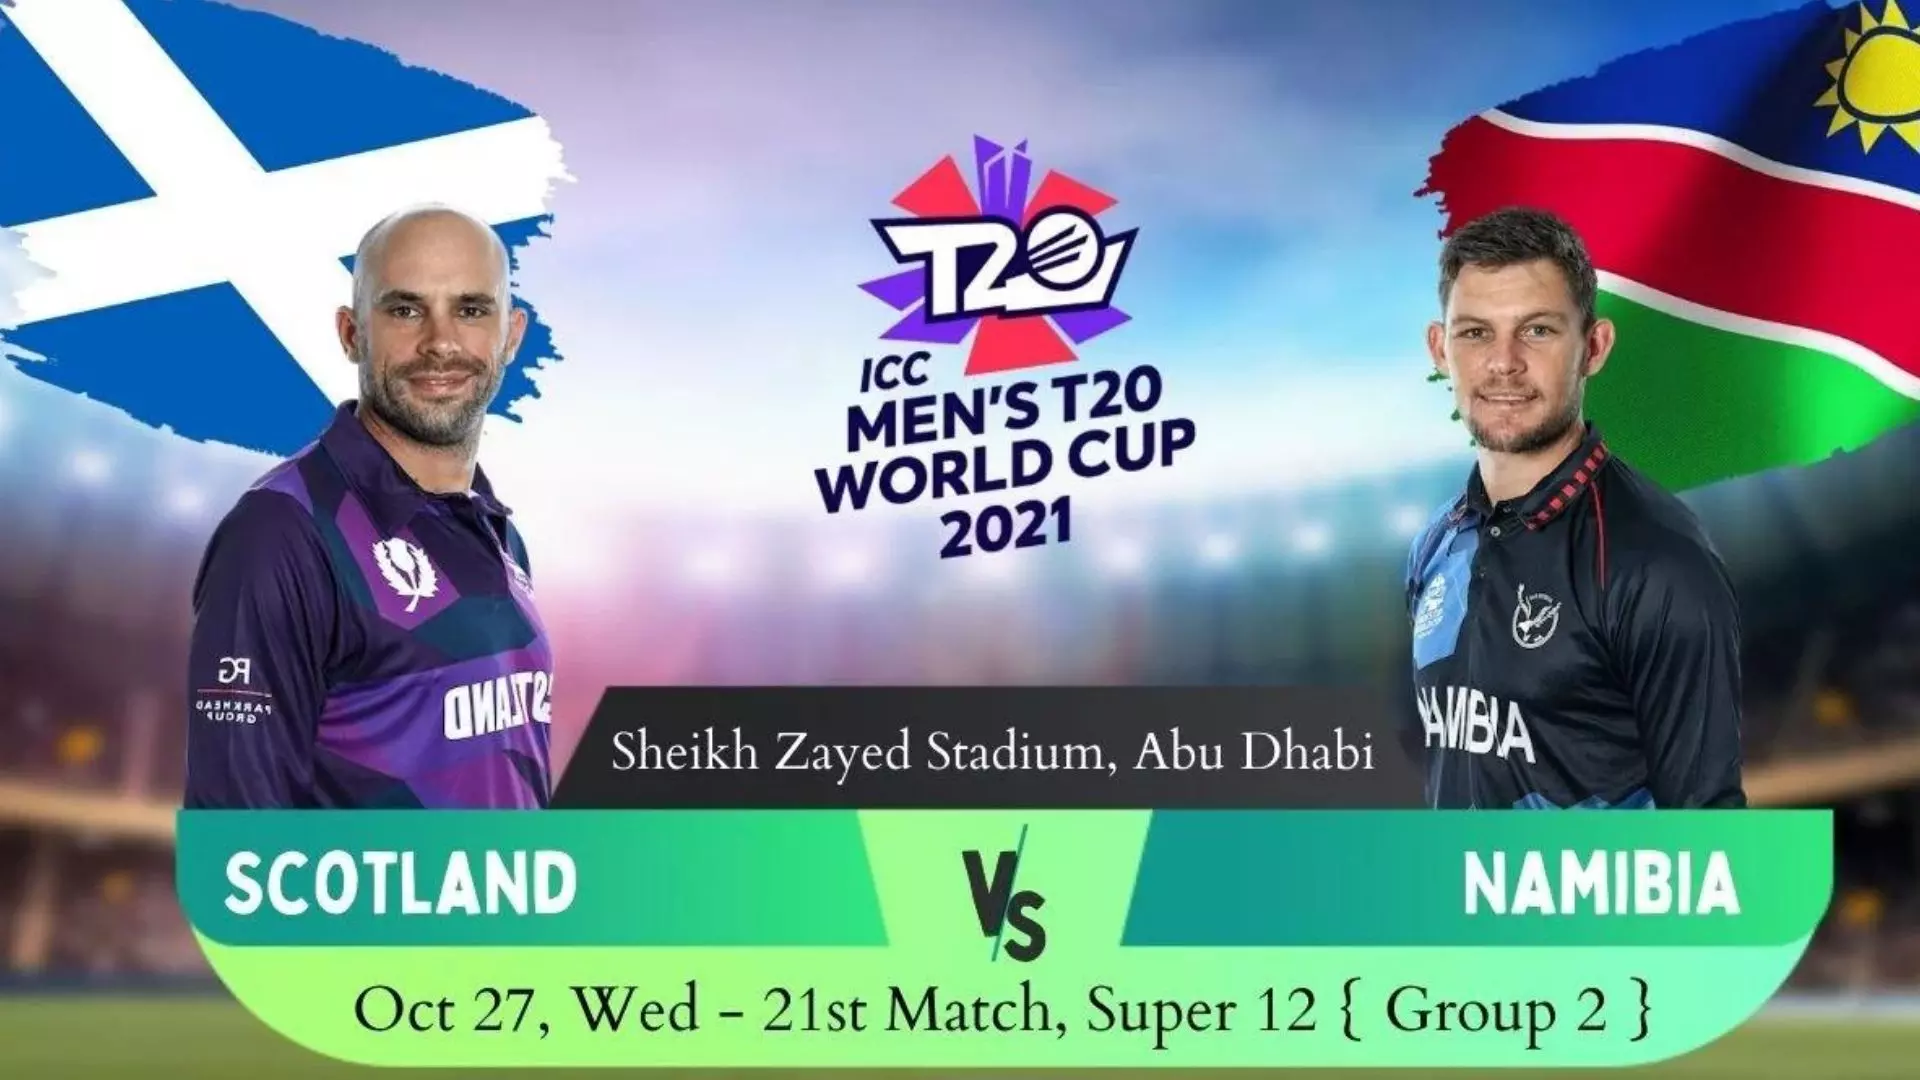 T20 World Cup 2021 Scotland Vs Namibia Match Preview Today 27th October 2021 - Cricket News